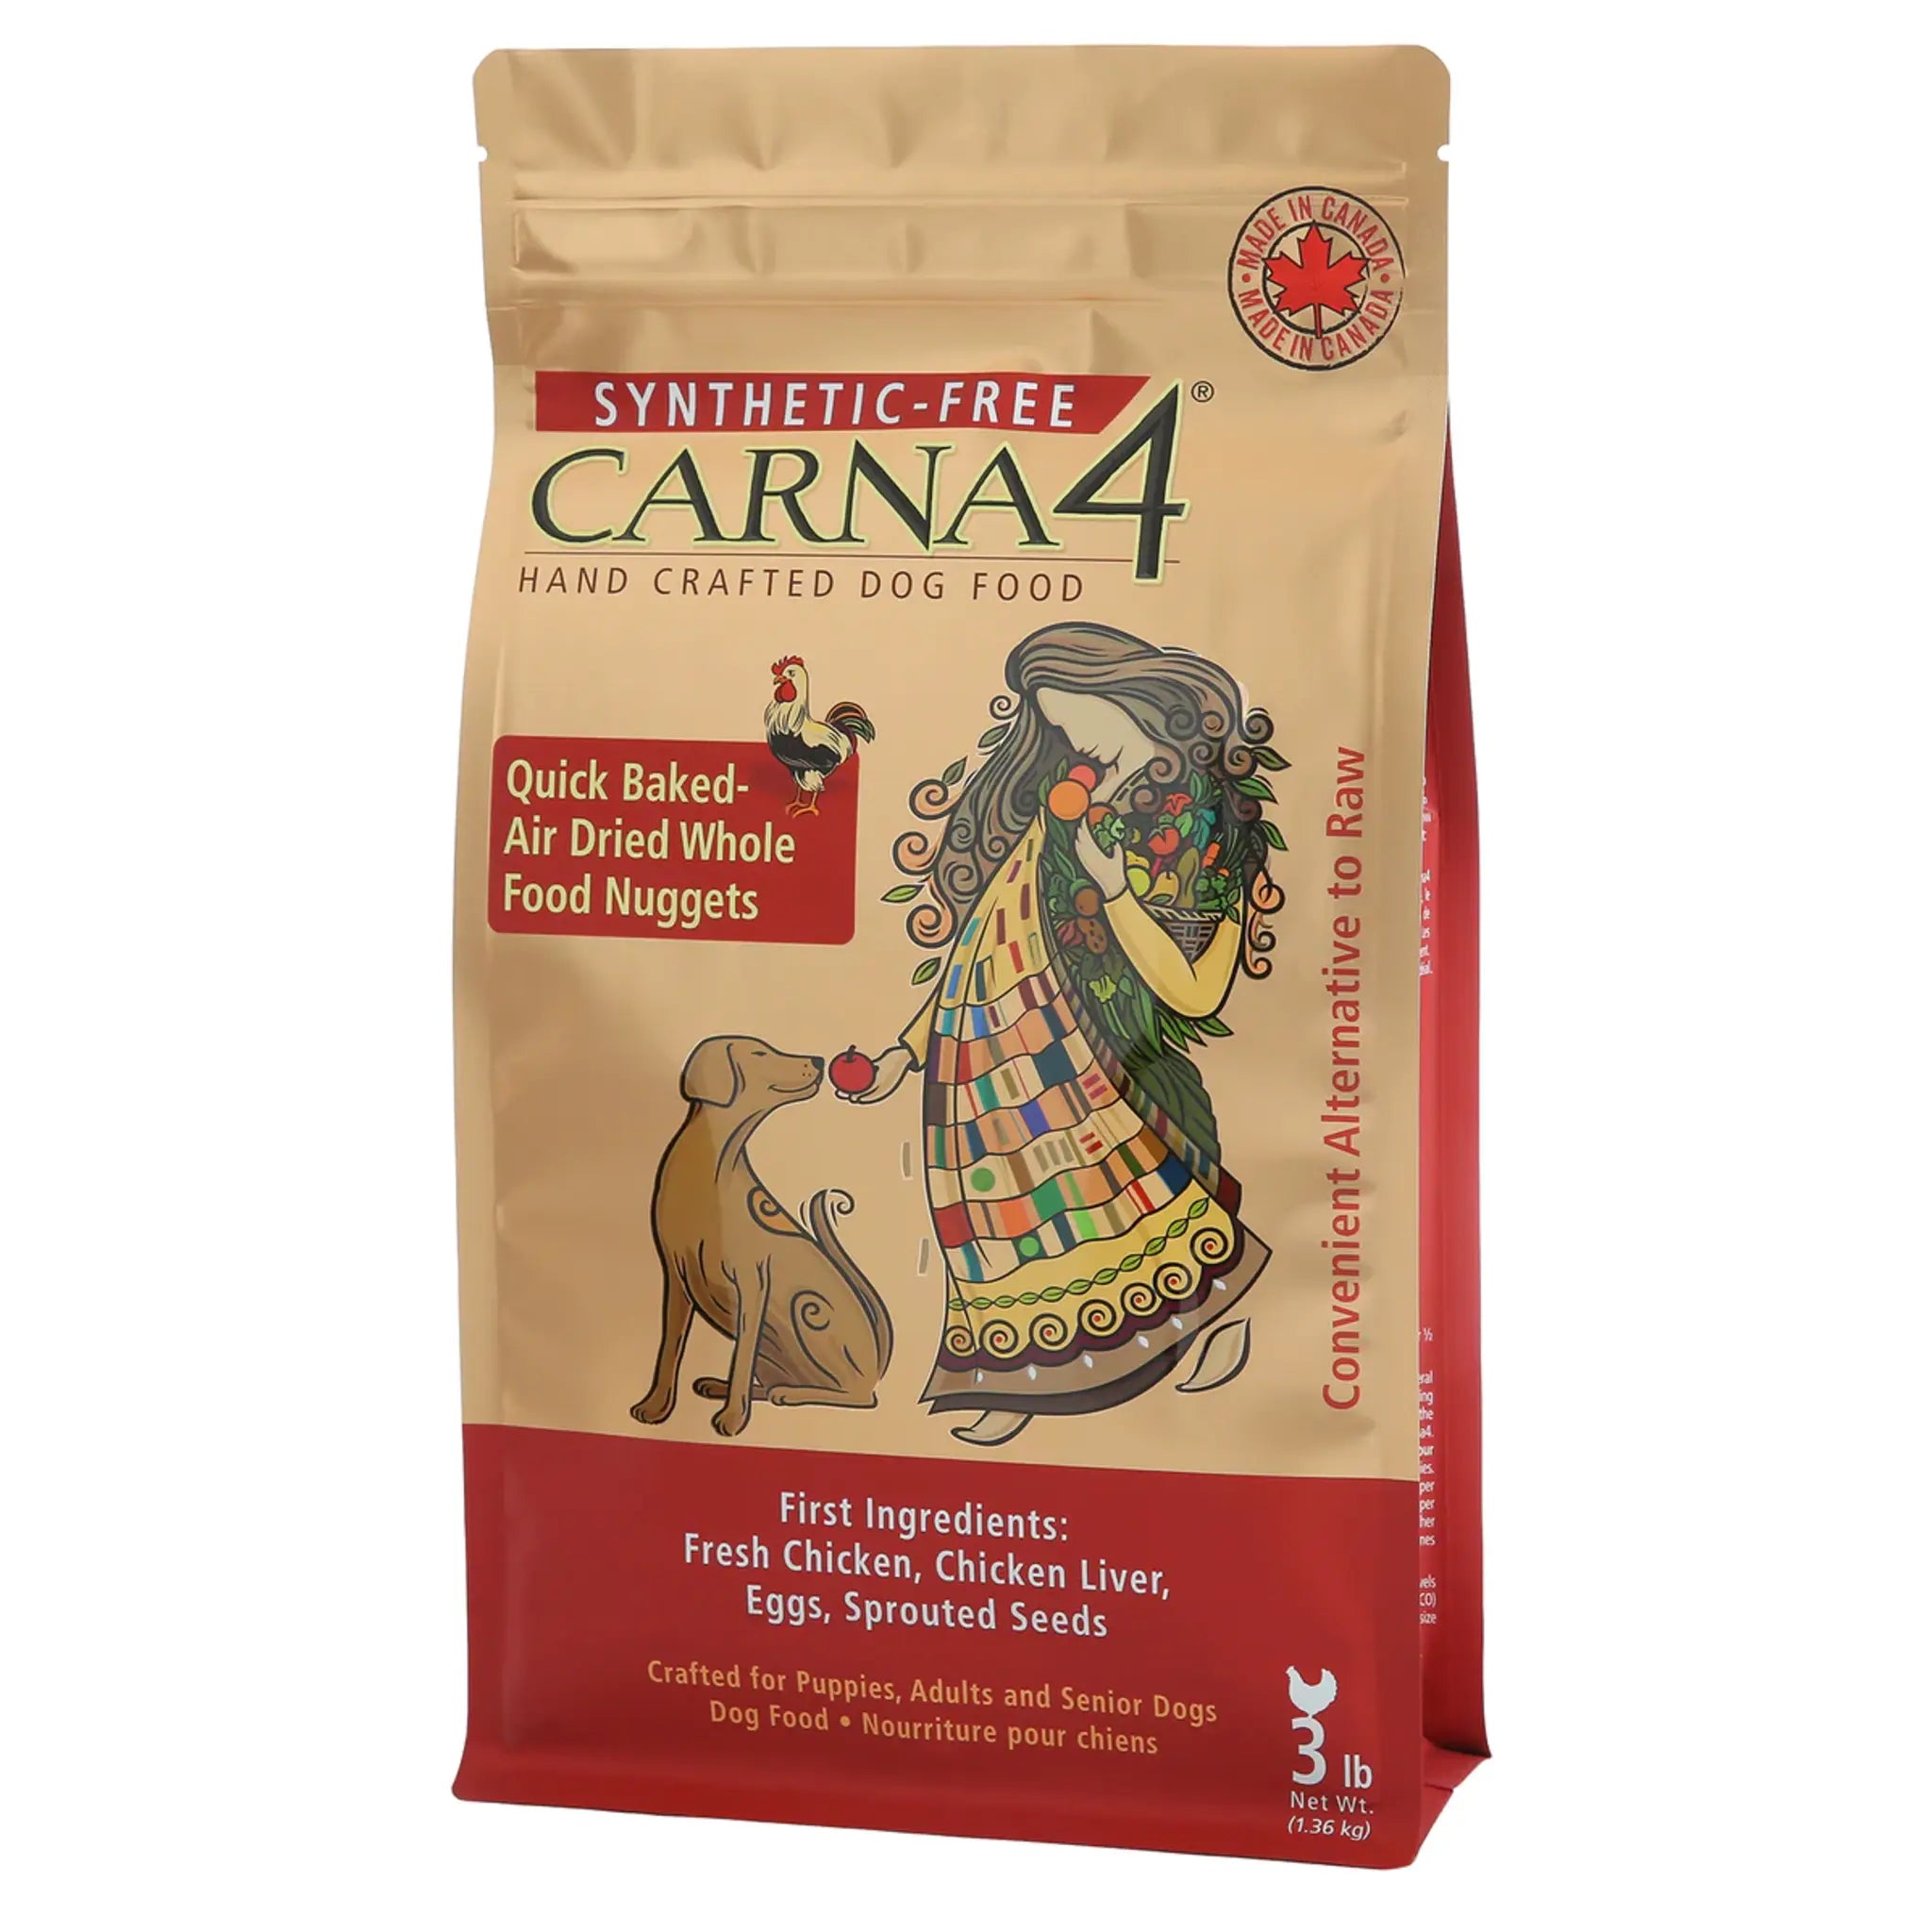 A bag of Carna4 Hand Crafted Dog Food, Chicken Recipe, Synthetic-Free, Made in Canada, 3 lb